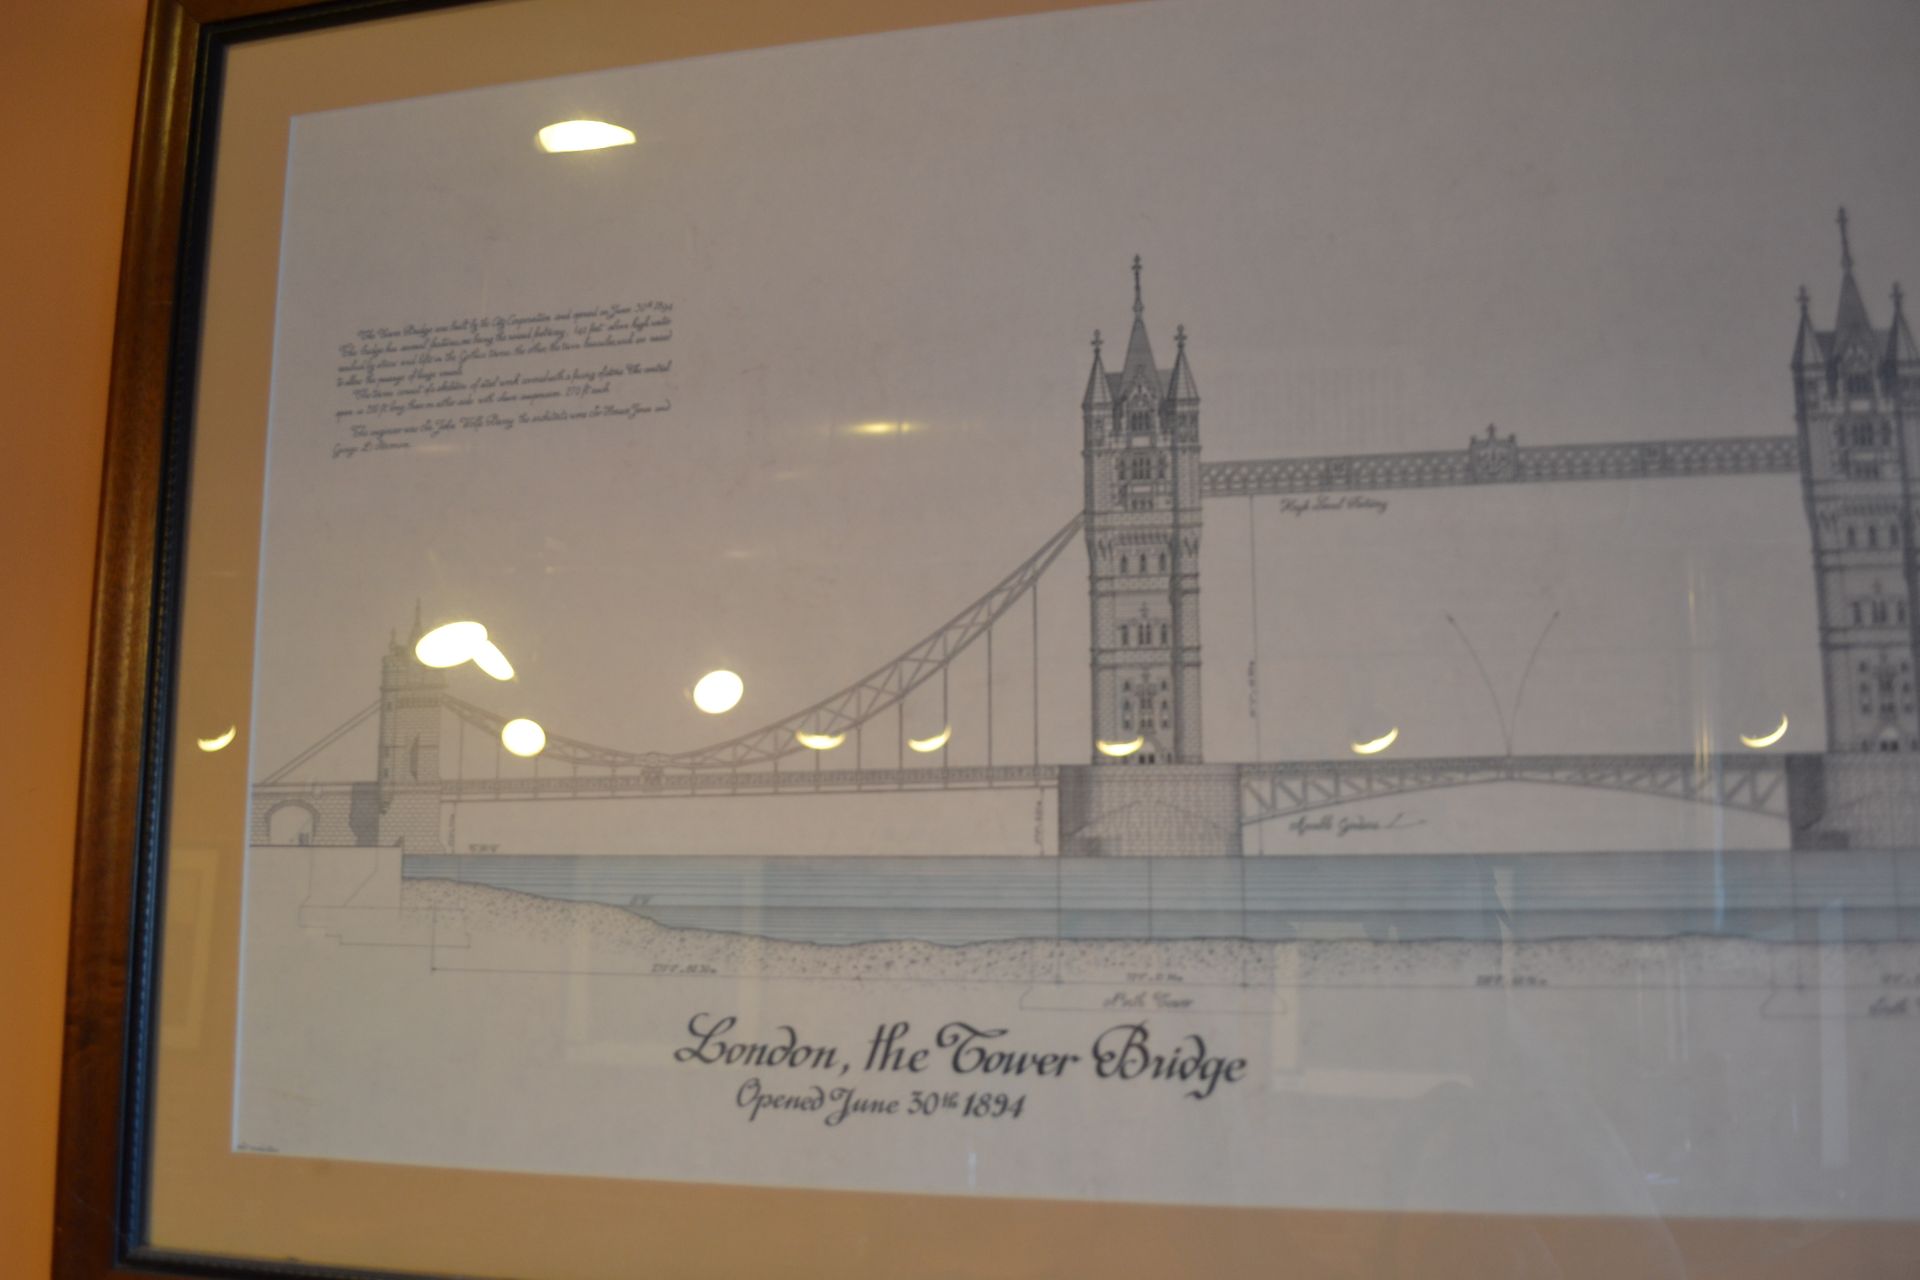 the Tower Bridge of London, Framed Print 42"x22" - Image 2 of 3